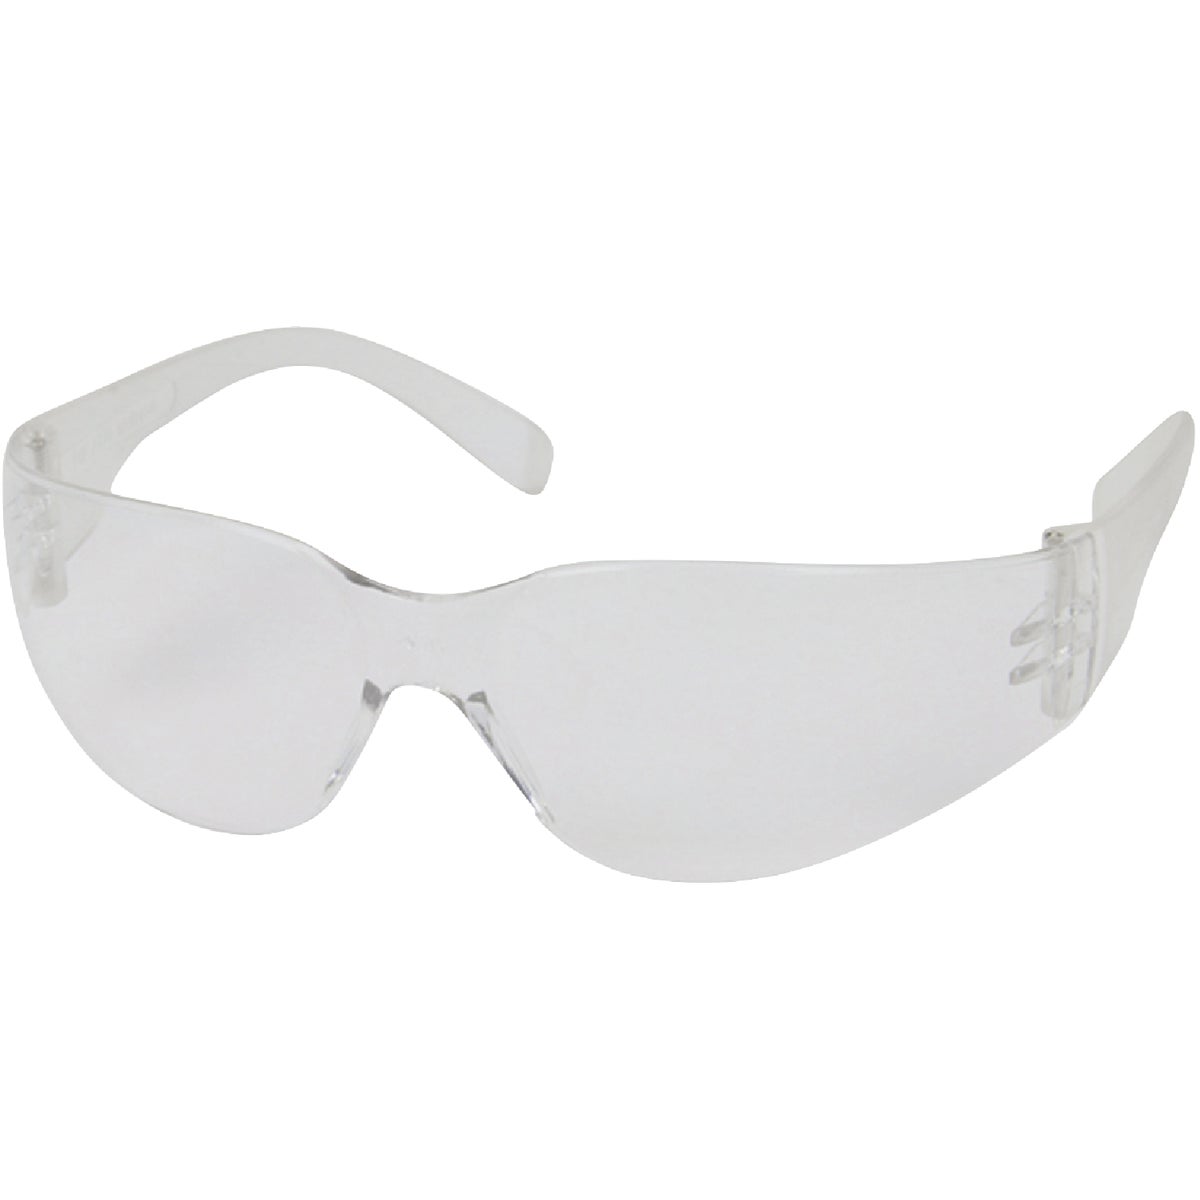 Item 322687, Safety glasses with close-fitting design to enhance protection against 